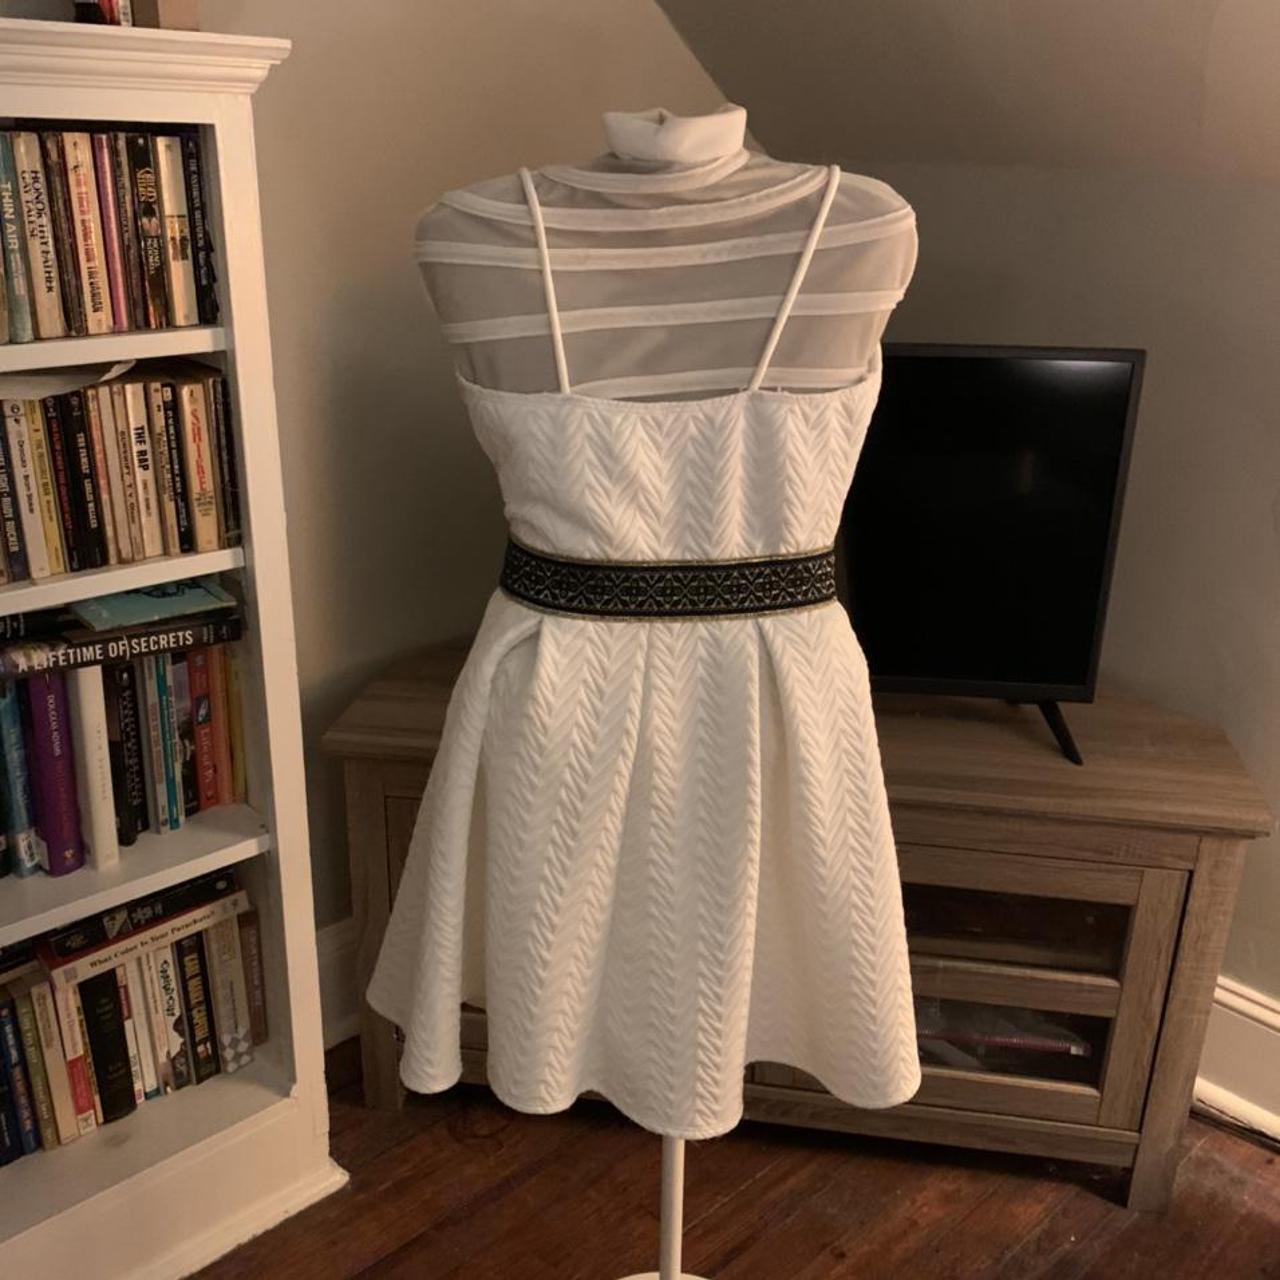 Product Image 2 - White dress
Thick and insulate great